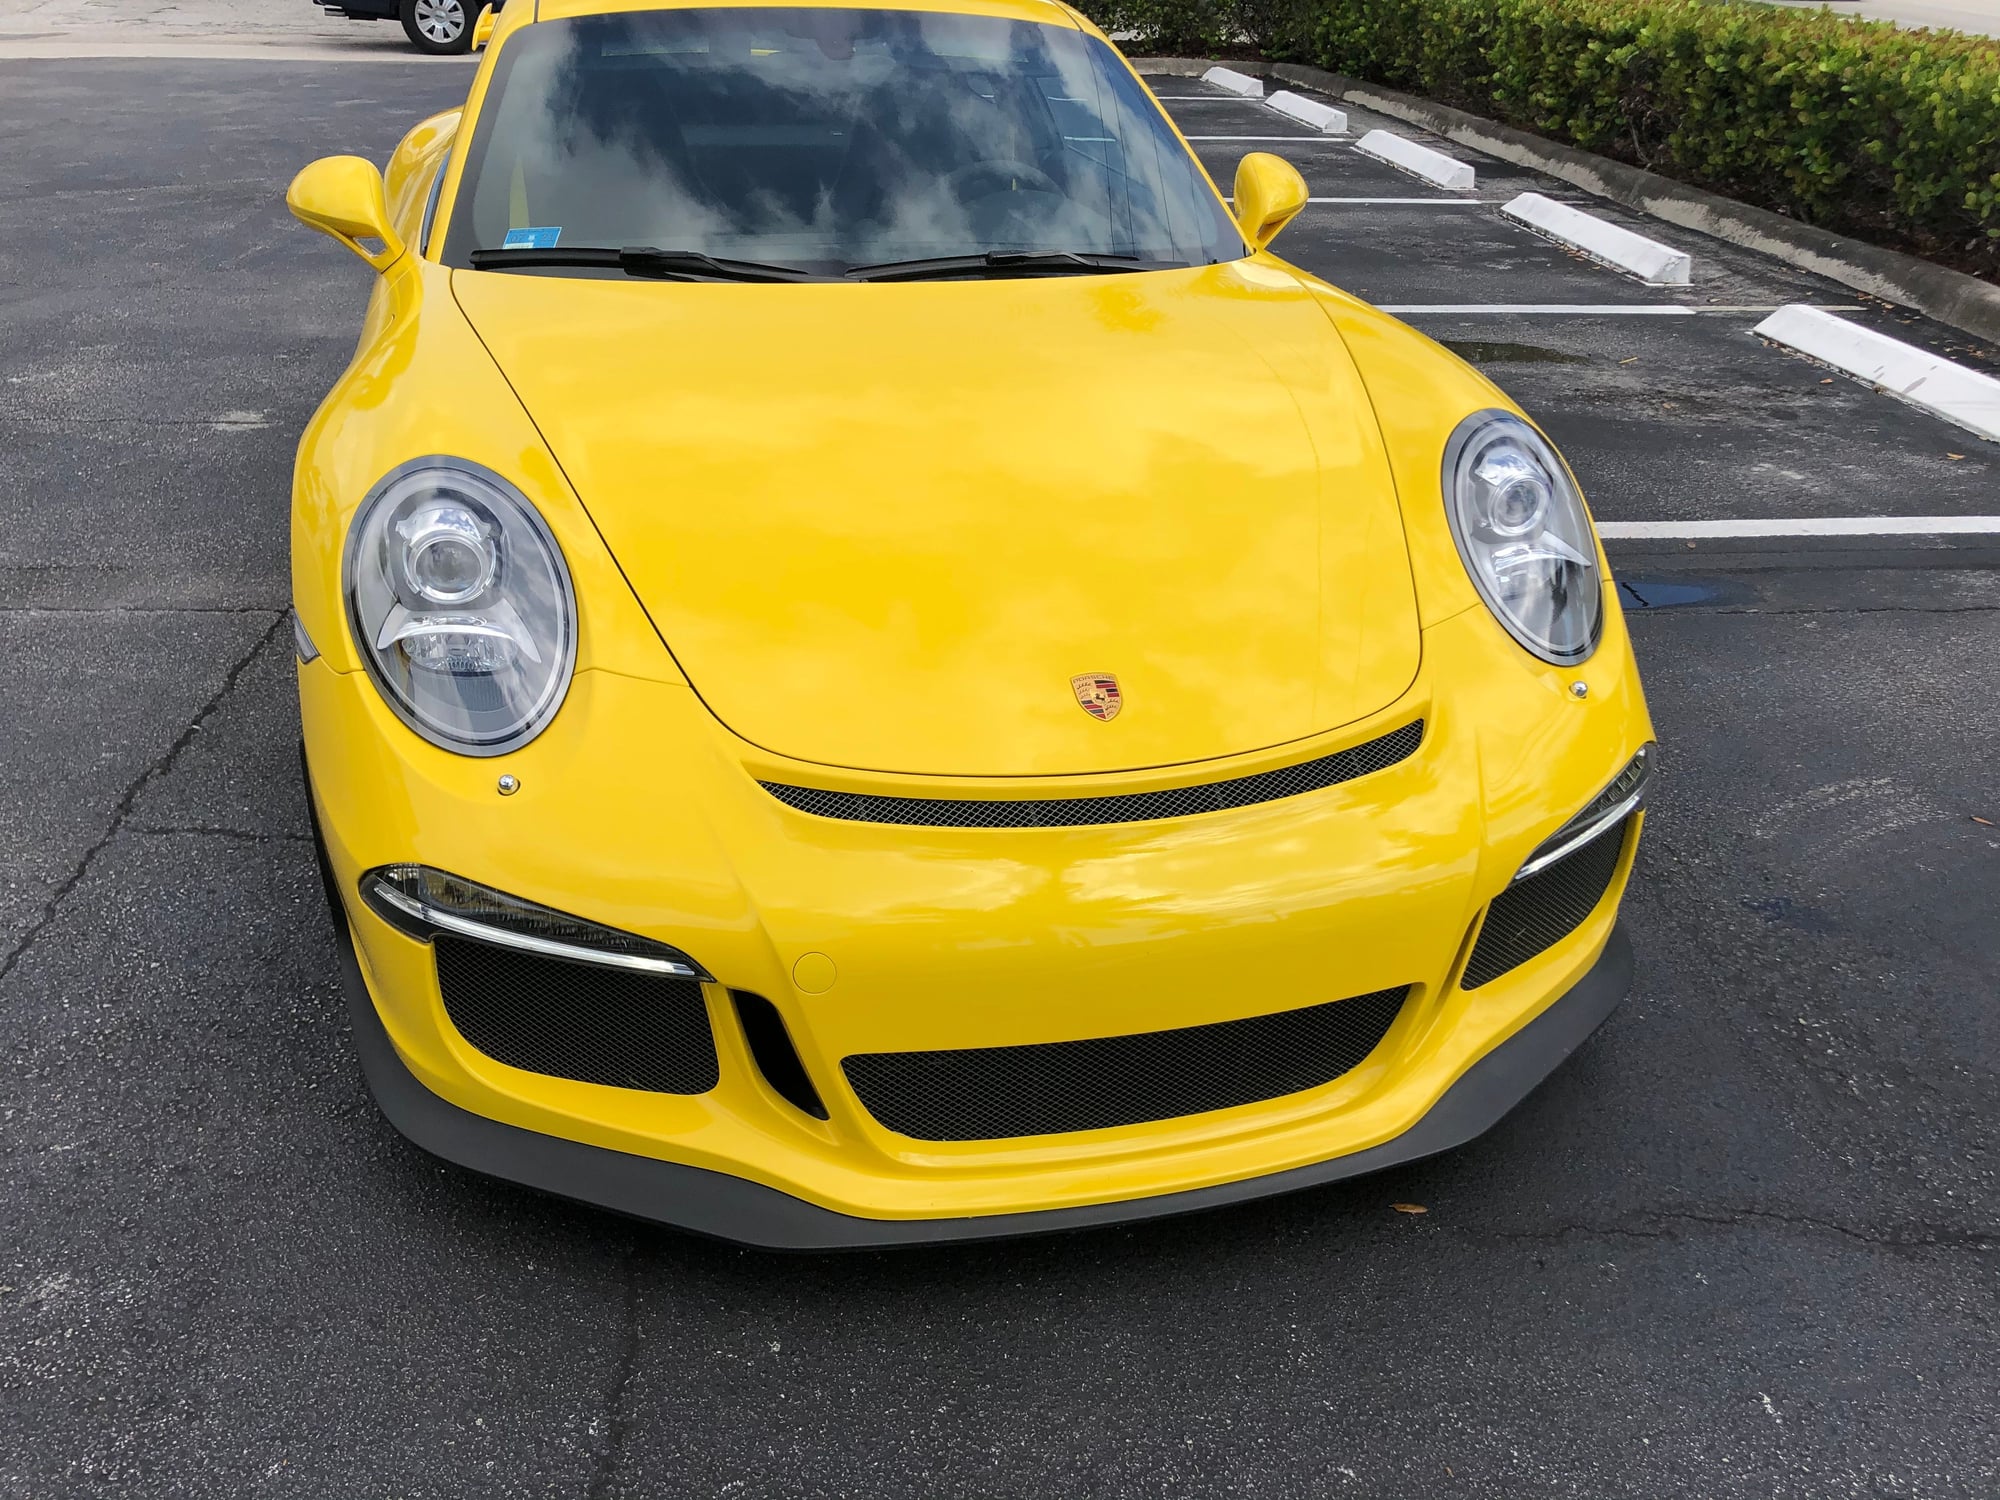 2014 Porsche GT3 - 2014 Porsche 911 GT3 in Racing Yellow 7100 Miles. - Used - VIN WP0AC2A97ES183297 - 7,100 Miles - 6 cyl - 2WD - Automatic - Coupe - Yellow - Pittsburgh, PA 15301, United States